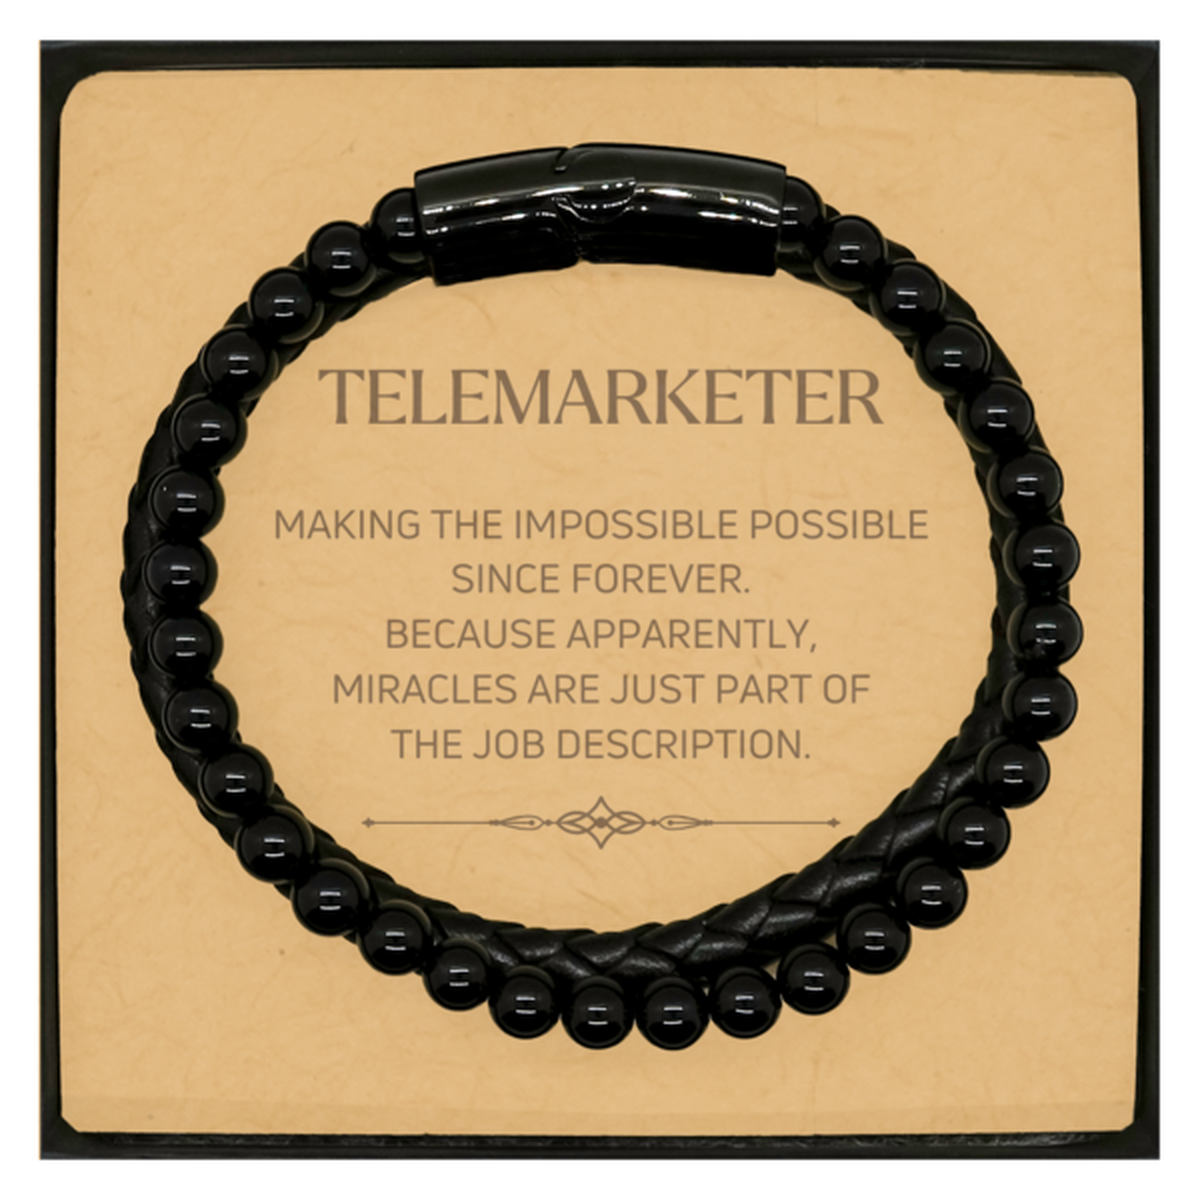 Funny Telemarketer Gifts, Miracles are just part of the job description, Inspirational Birthday Christmas Stone Leather Bracelets For Telemarketer, Men, Women, Coworkers, Friends, Boss